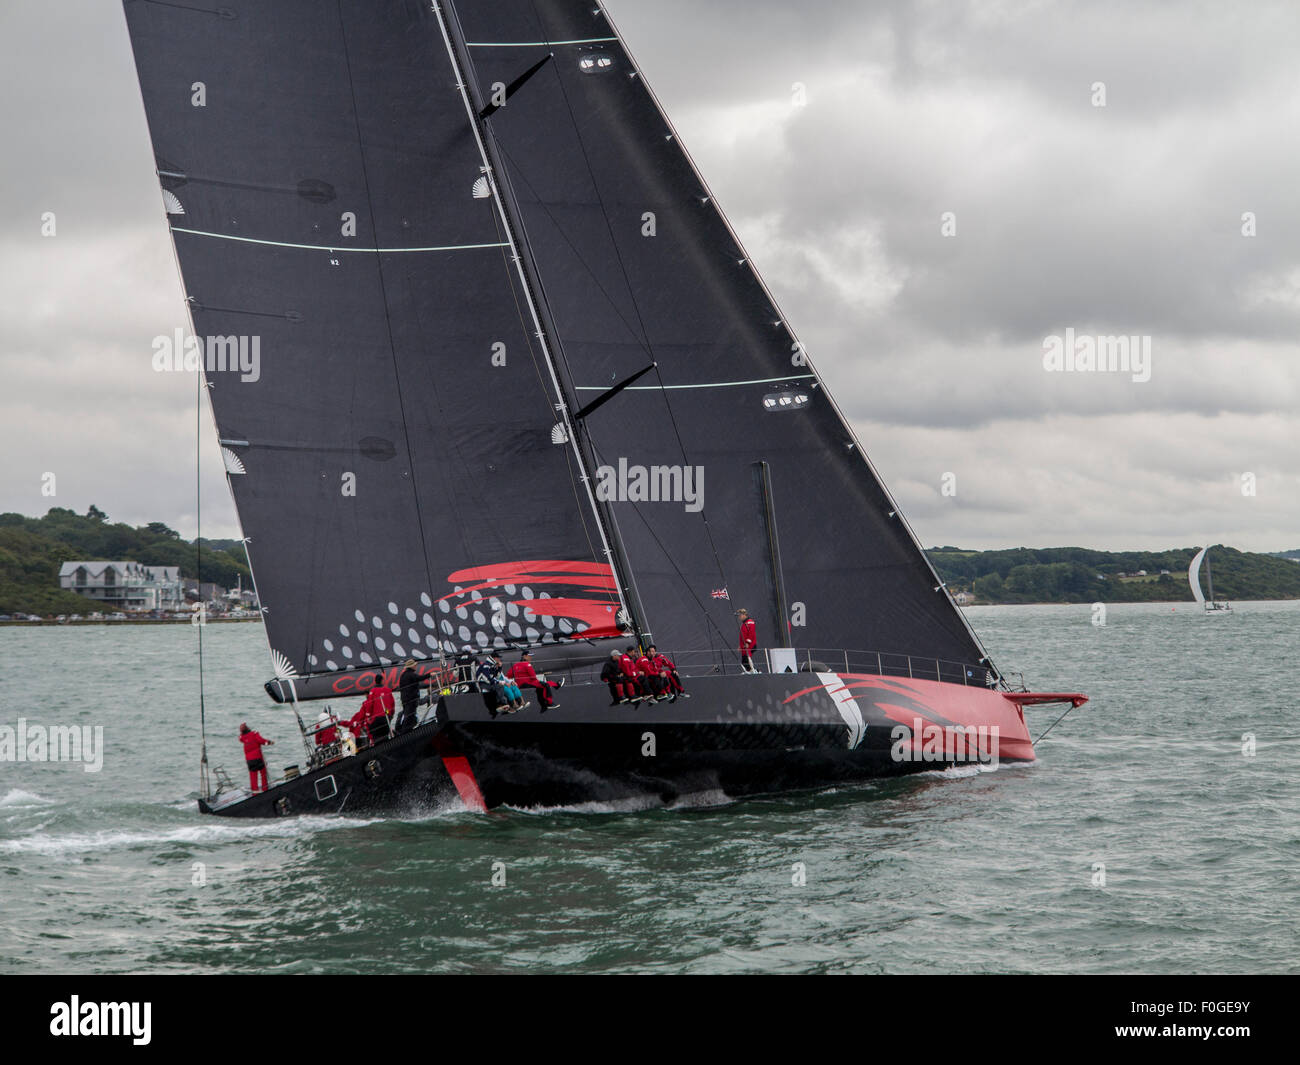 Cowes, Isle of Wight, UK. 14th August 2015. Favourite to win the 2015 Fastnet Race, Comanche trains at Cowes for the start of th Stock Photo